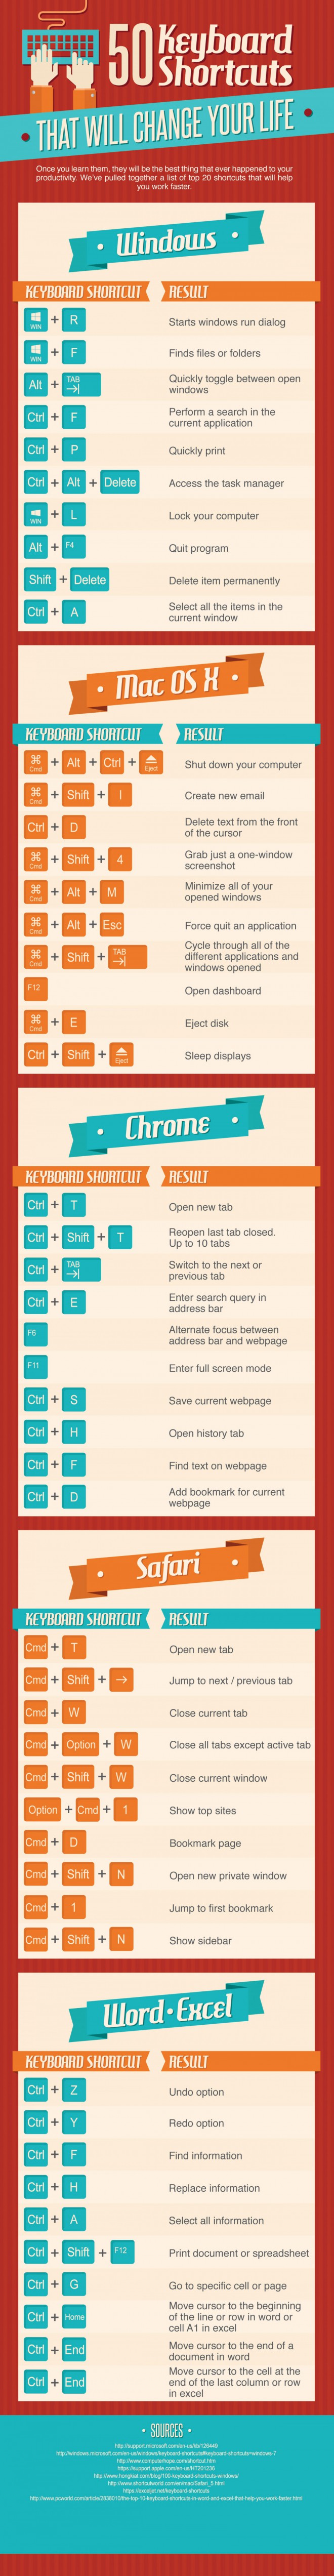 Keyboard shortcuts you need to know.